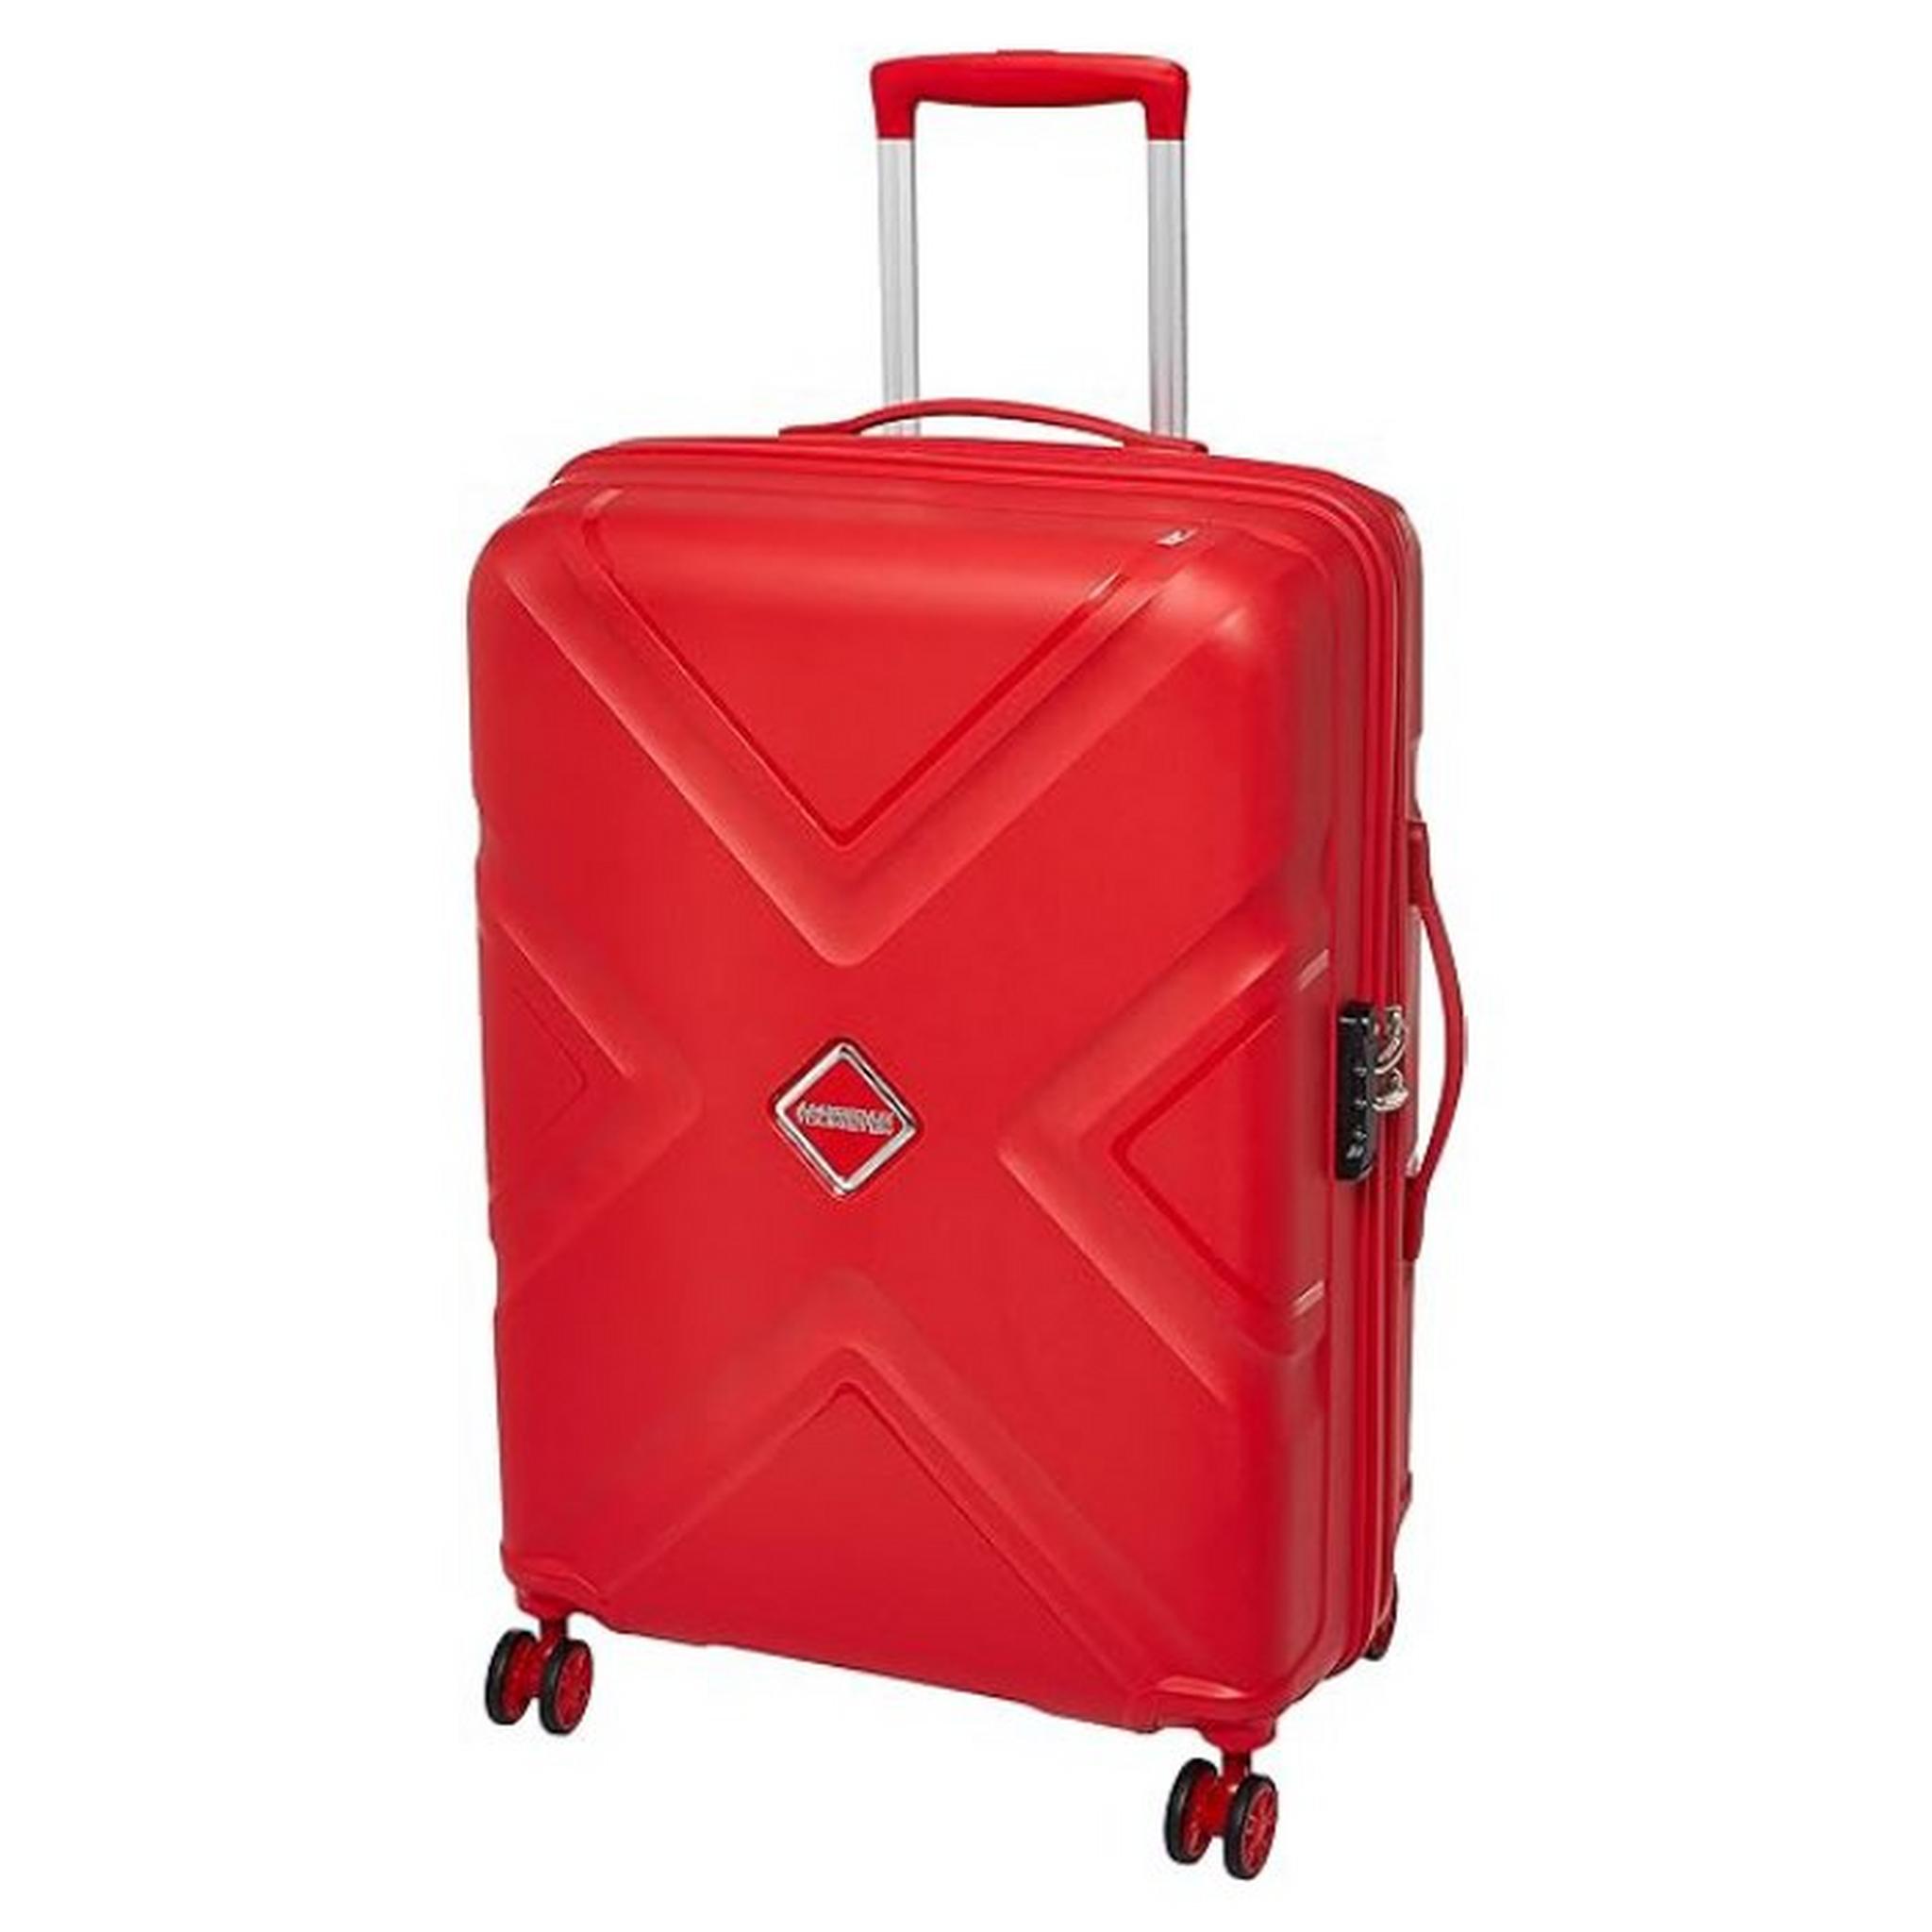 American Tourister Kross Hard Luggage Trolley Bag (Set Of 3), 79+68+55CM, LE2X00104 – Red